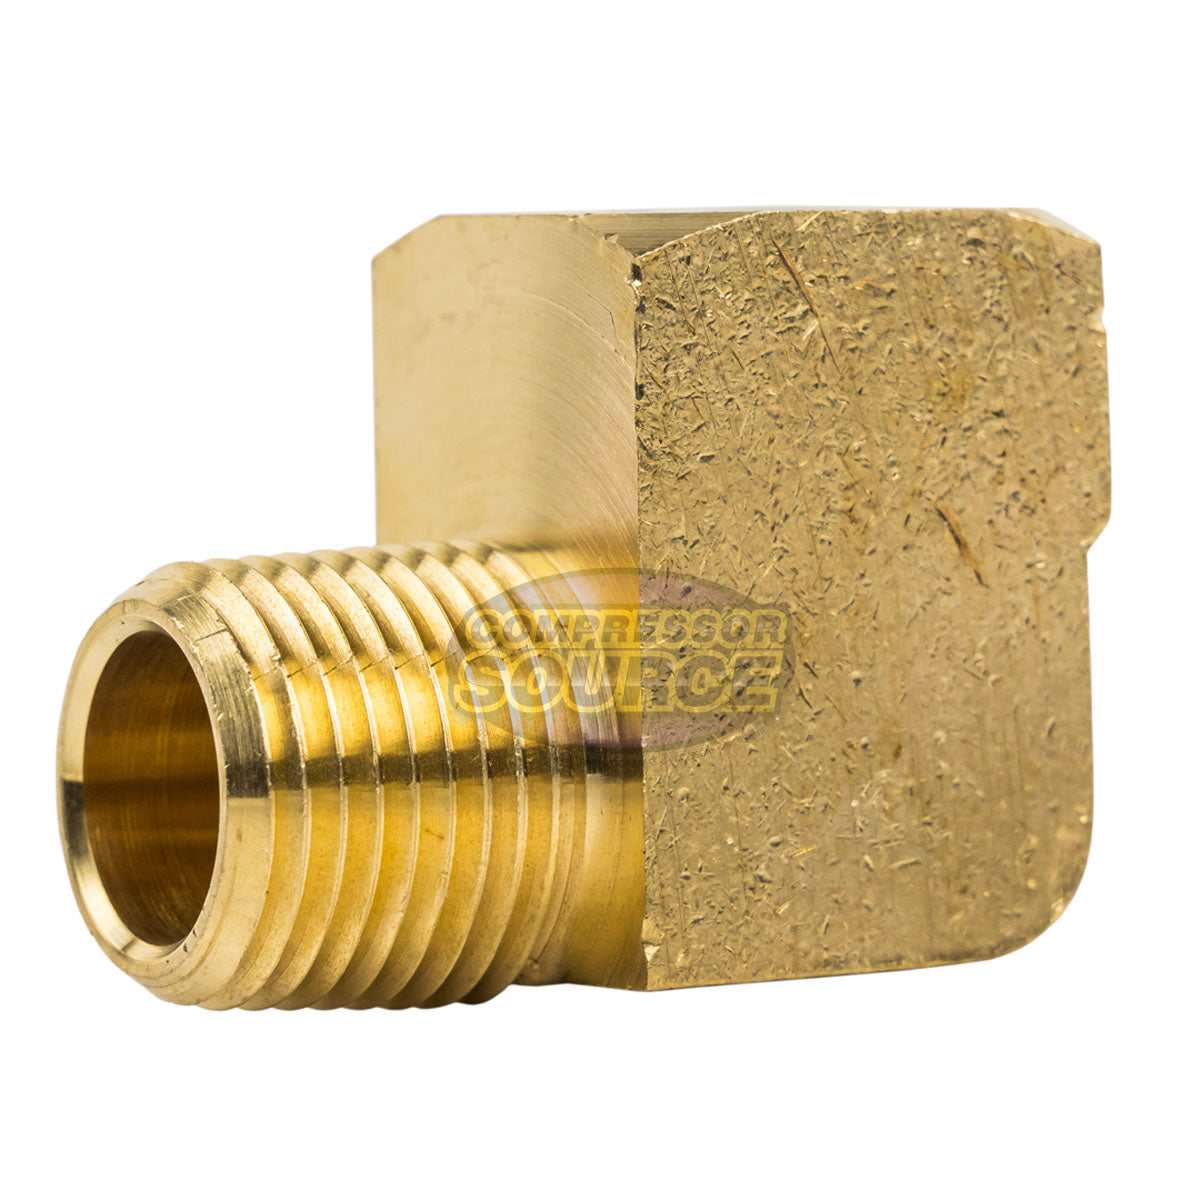 Street Elbow 90 Degree 1/2" Male NPT x 1/2" Female NPT Pipe Connector 5-Pack